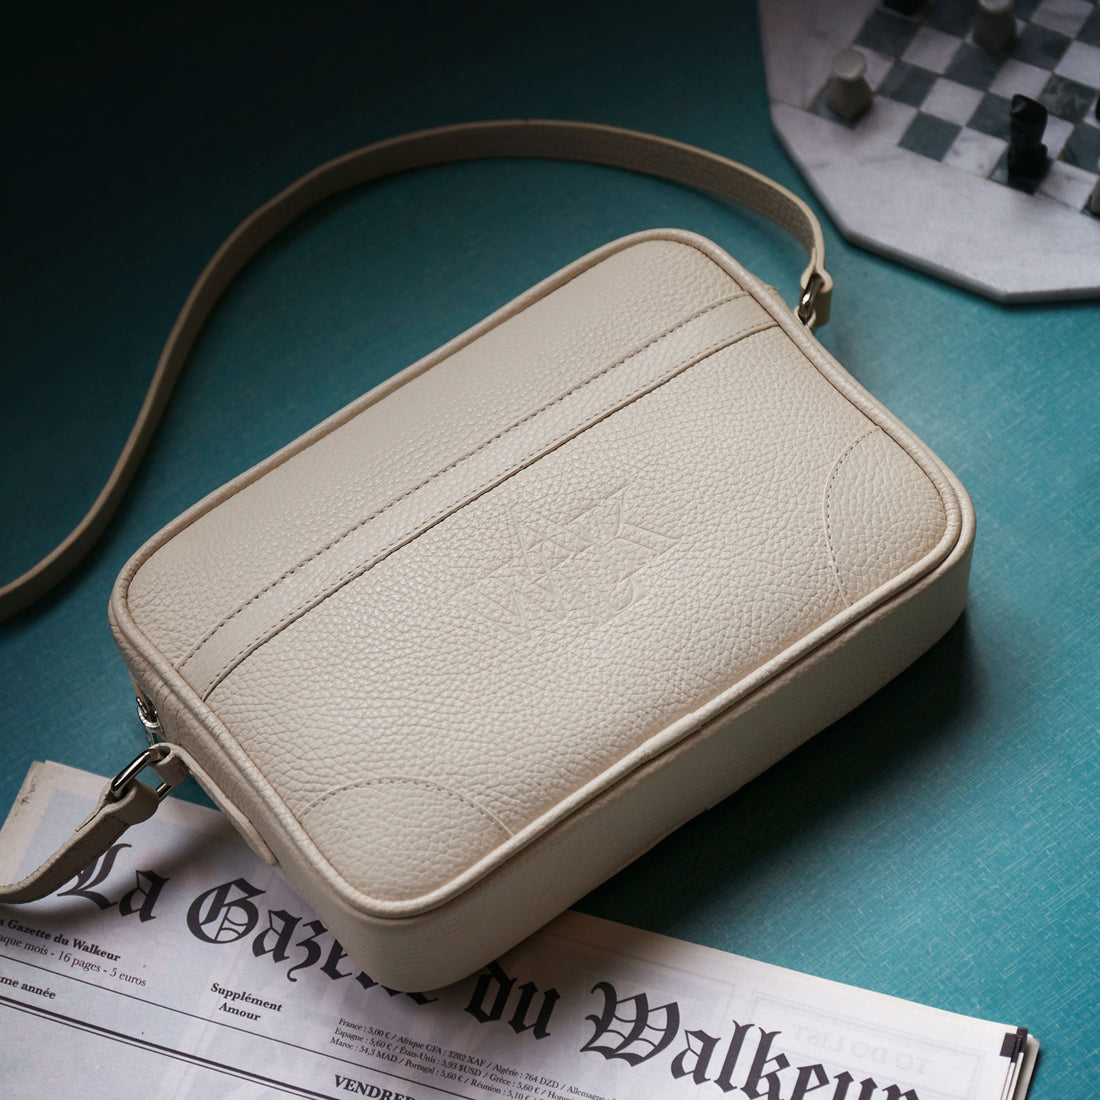 THE BEIGE LEATHER BAG